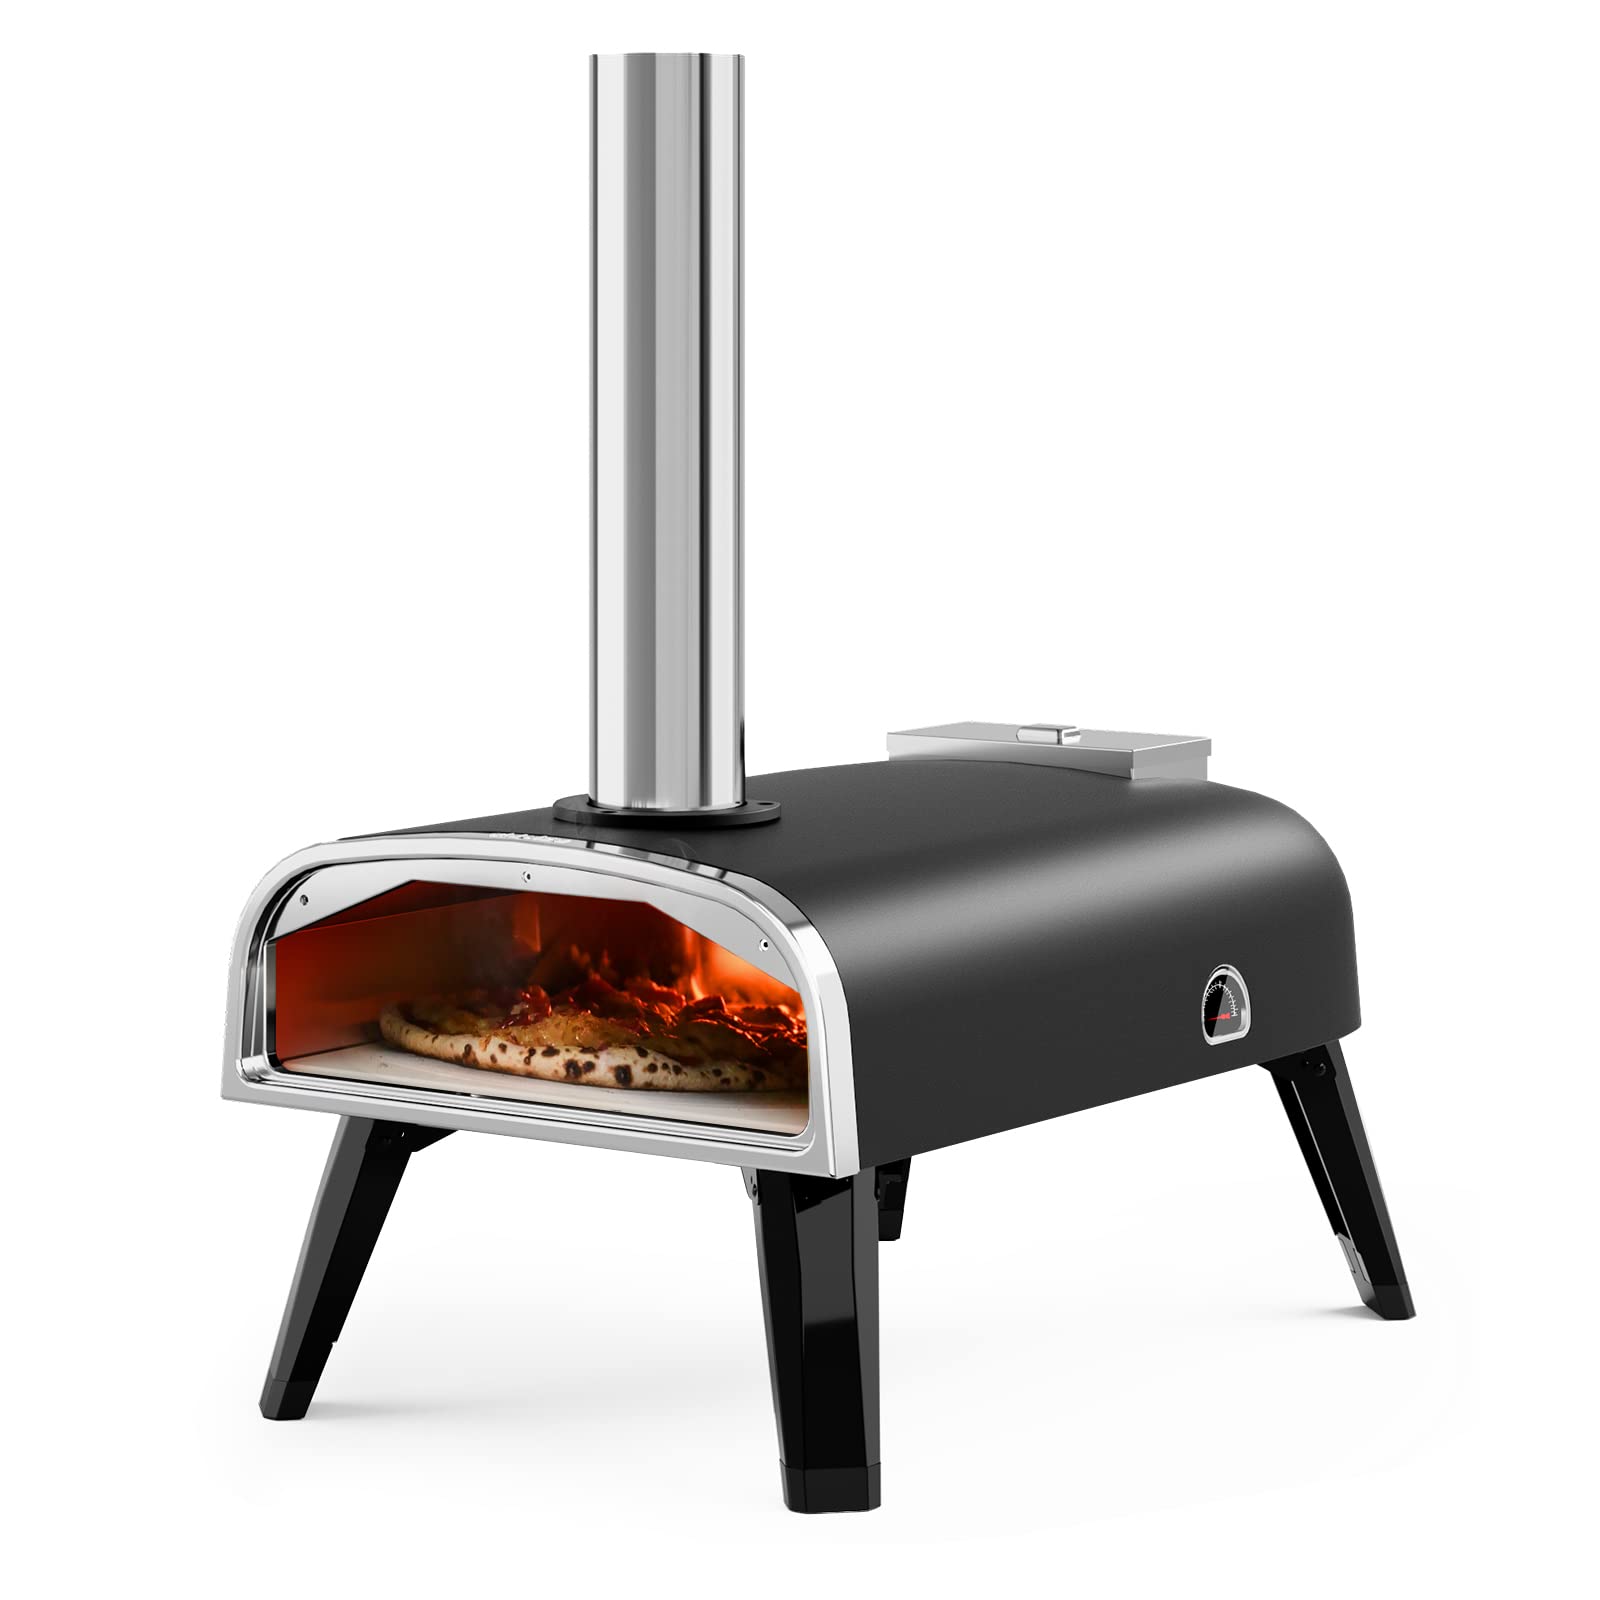 aidpiza Pizza Oven Outdoor 12" Wood Fired Pizza Ovens Pellet Pizza Stove for Outside, Portable Stainless Steel Pizza Oven for Backyard Pizza Maker Portable Mobile Outdoor Kitchen black